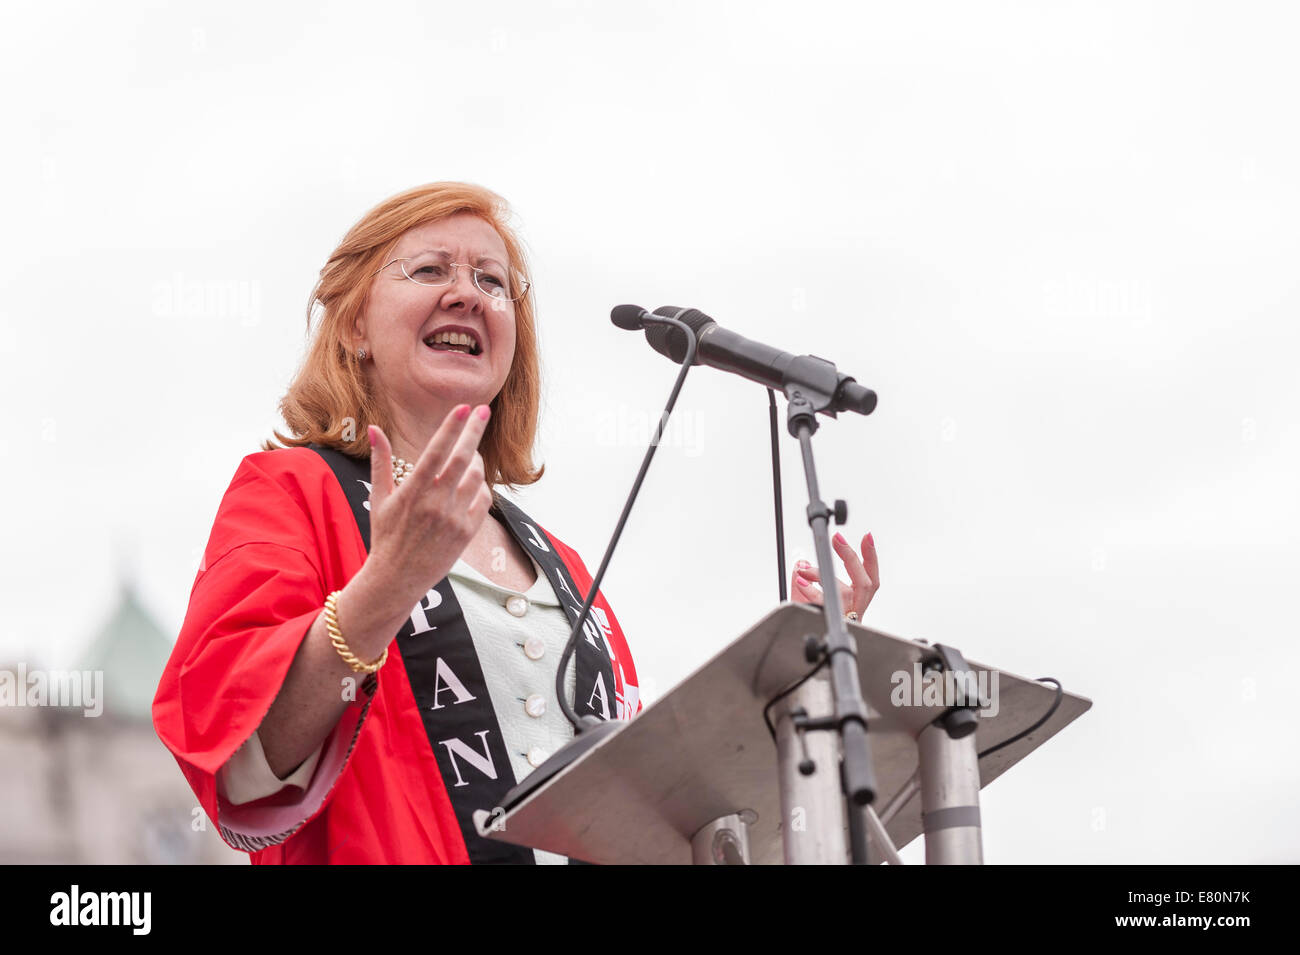 London, UK, 27 September 2014. The sixth Japan Matsuri takes place in Trafalgar Square in front of an audience of thousands of Londoners.  The  annual festival showcases many aspects of Japanese culture.  Pictured : Deputy Mayor of London, Victoria Borwick, gives a speech at the opening ceremony.  Credit:  Stephen Chung/Alamy Live News Stock Photo